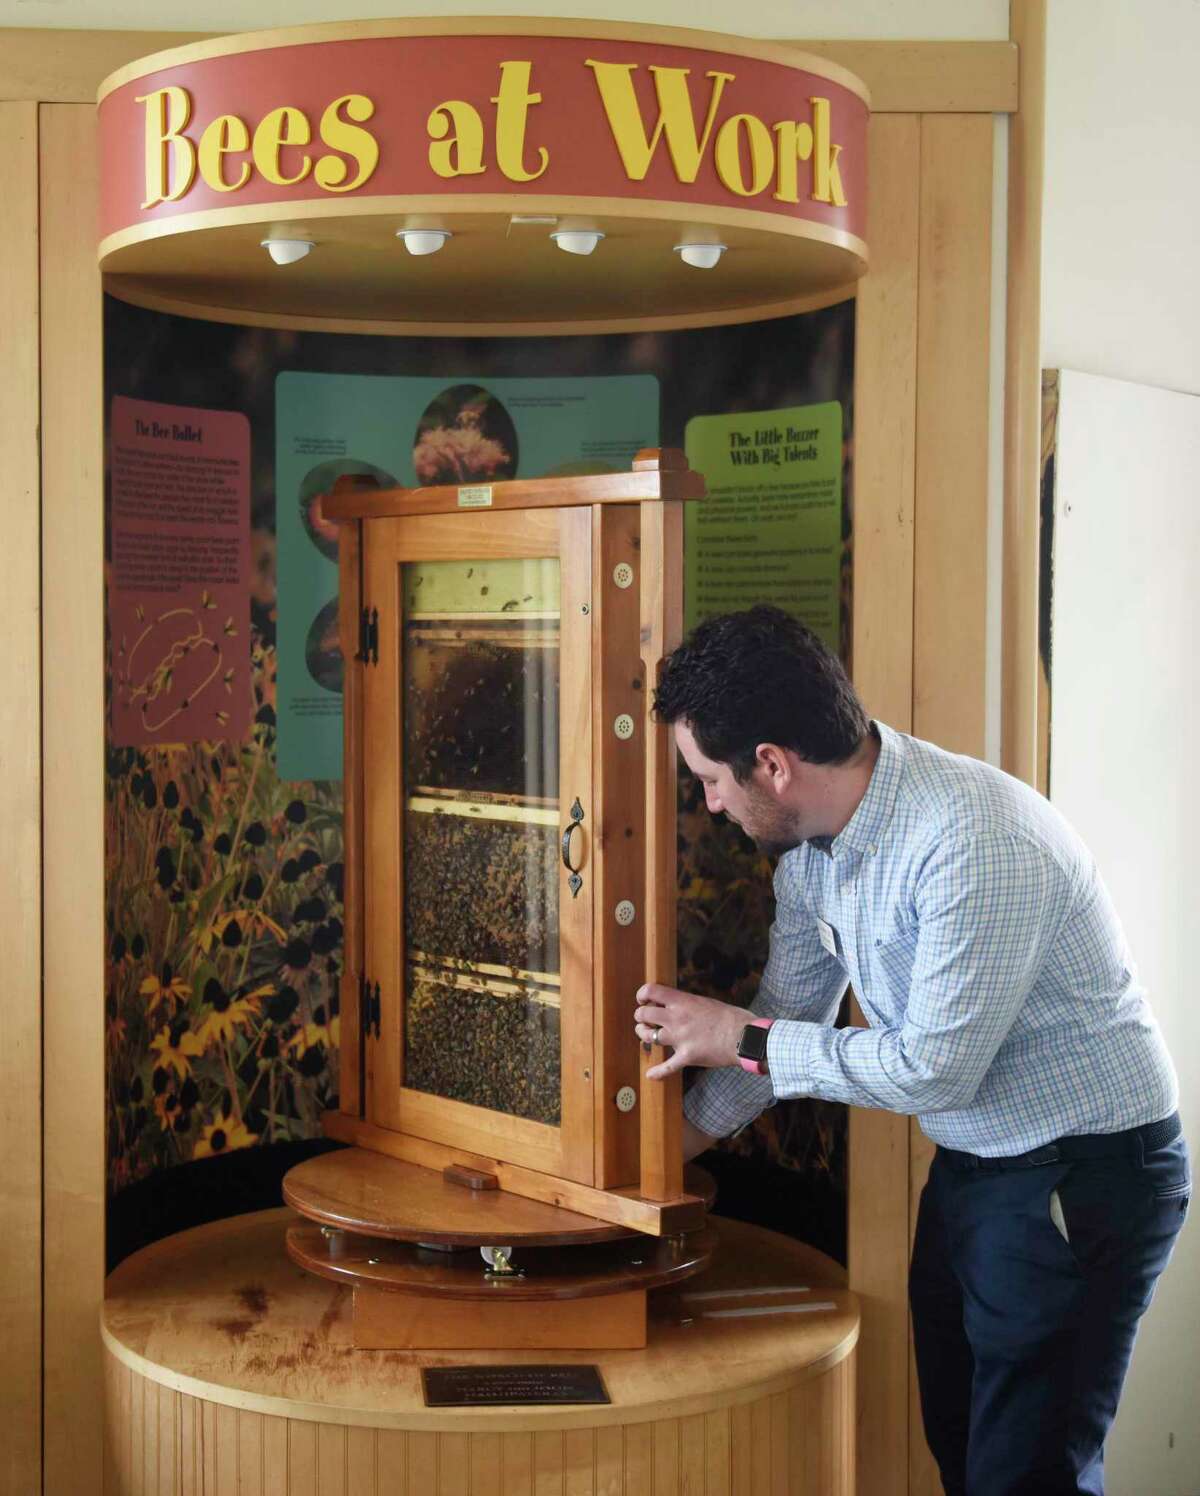 Audubon Director Eli Schaffer helps install the new beehive at the grand reopening of the Greenwich Audubon Center on Sunday. After two years of the building being closed to the public, the Audubon center reopened Sunday to celebrate Earth Day and showcase the newly redesigned learning center space. Visitors enjoyed the new bee hive display, nature tours, and live critters at the open house event.